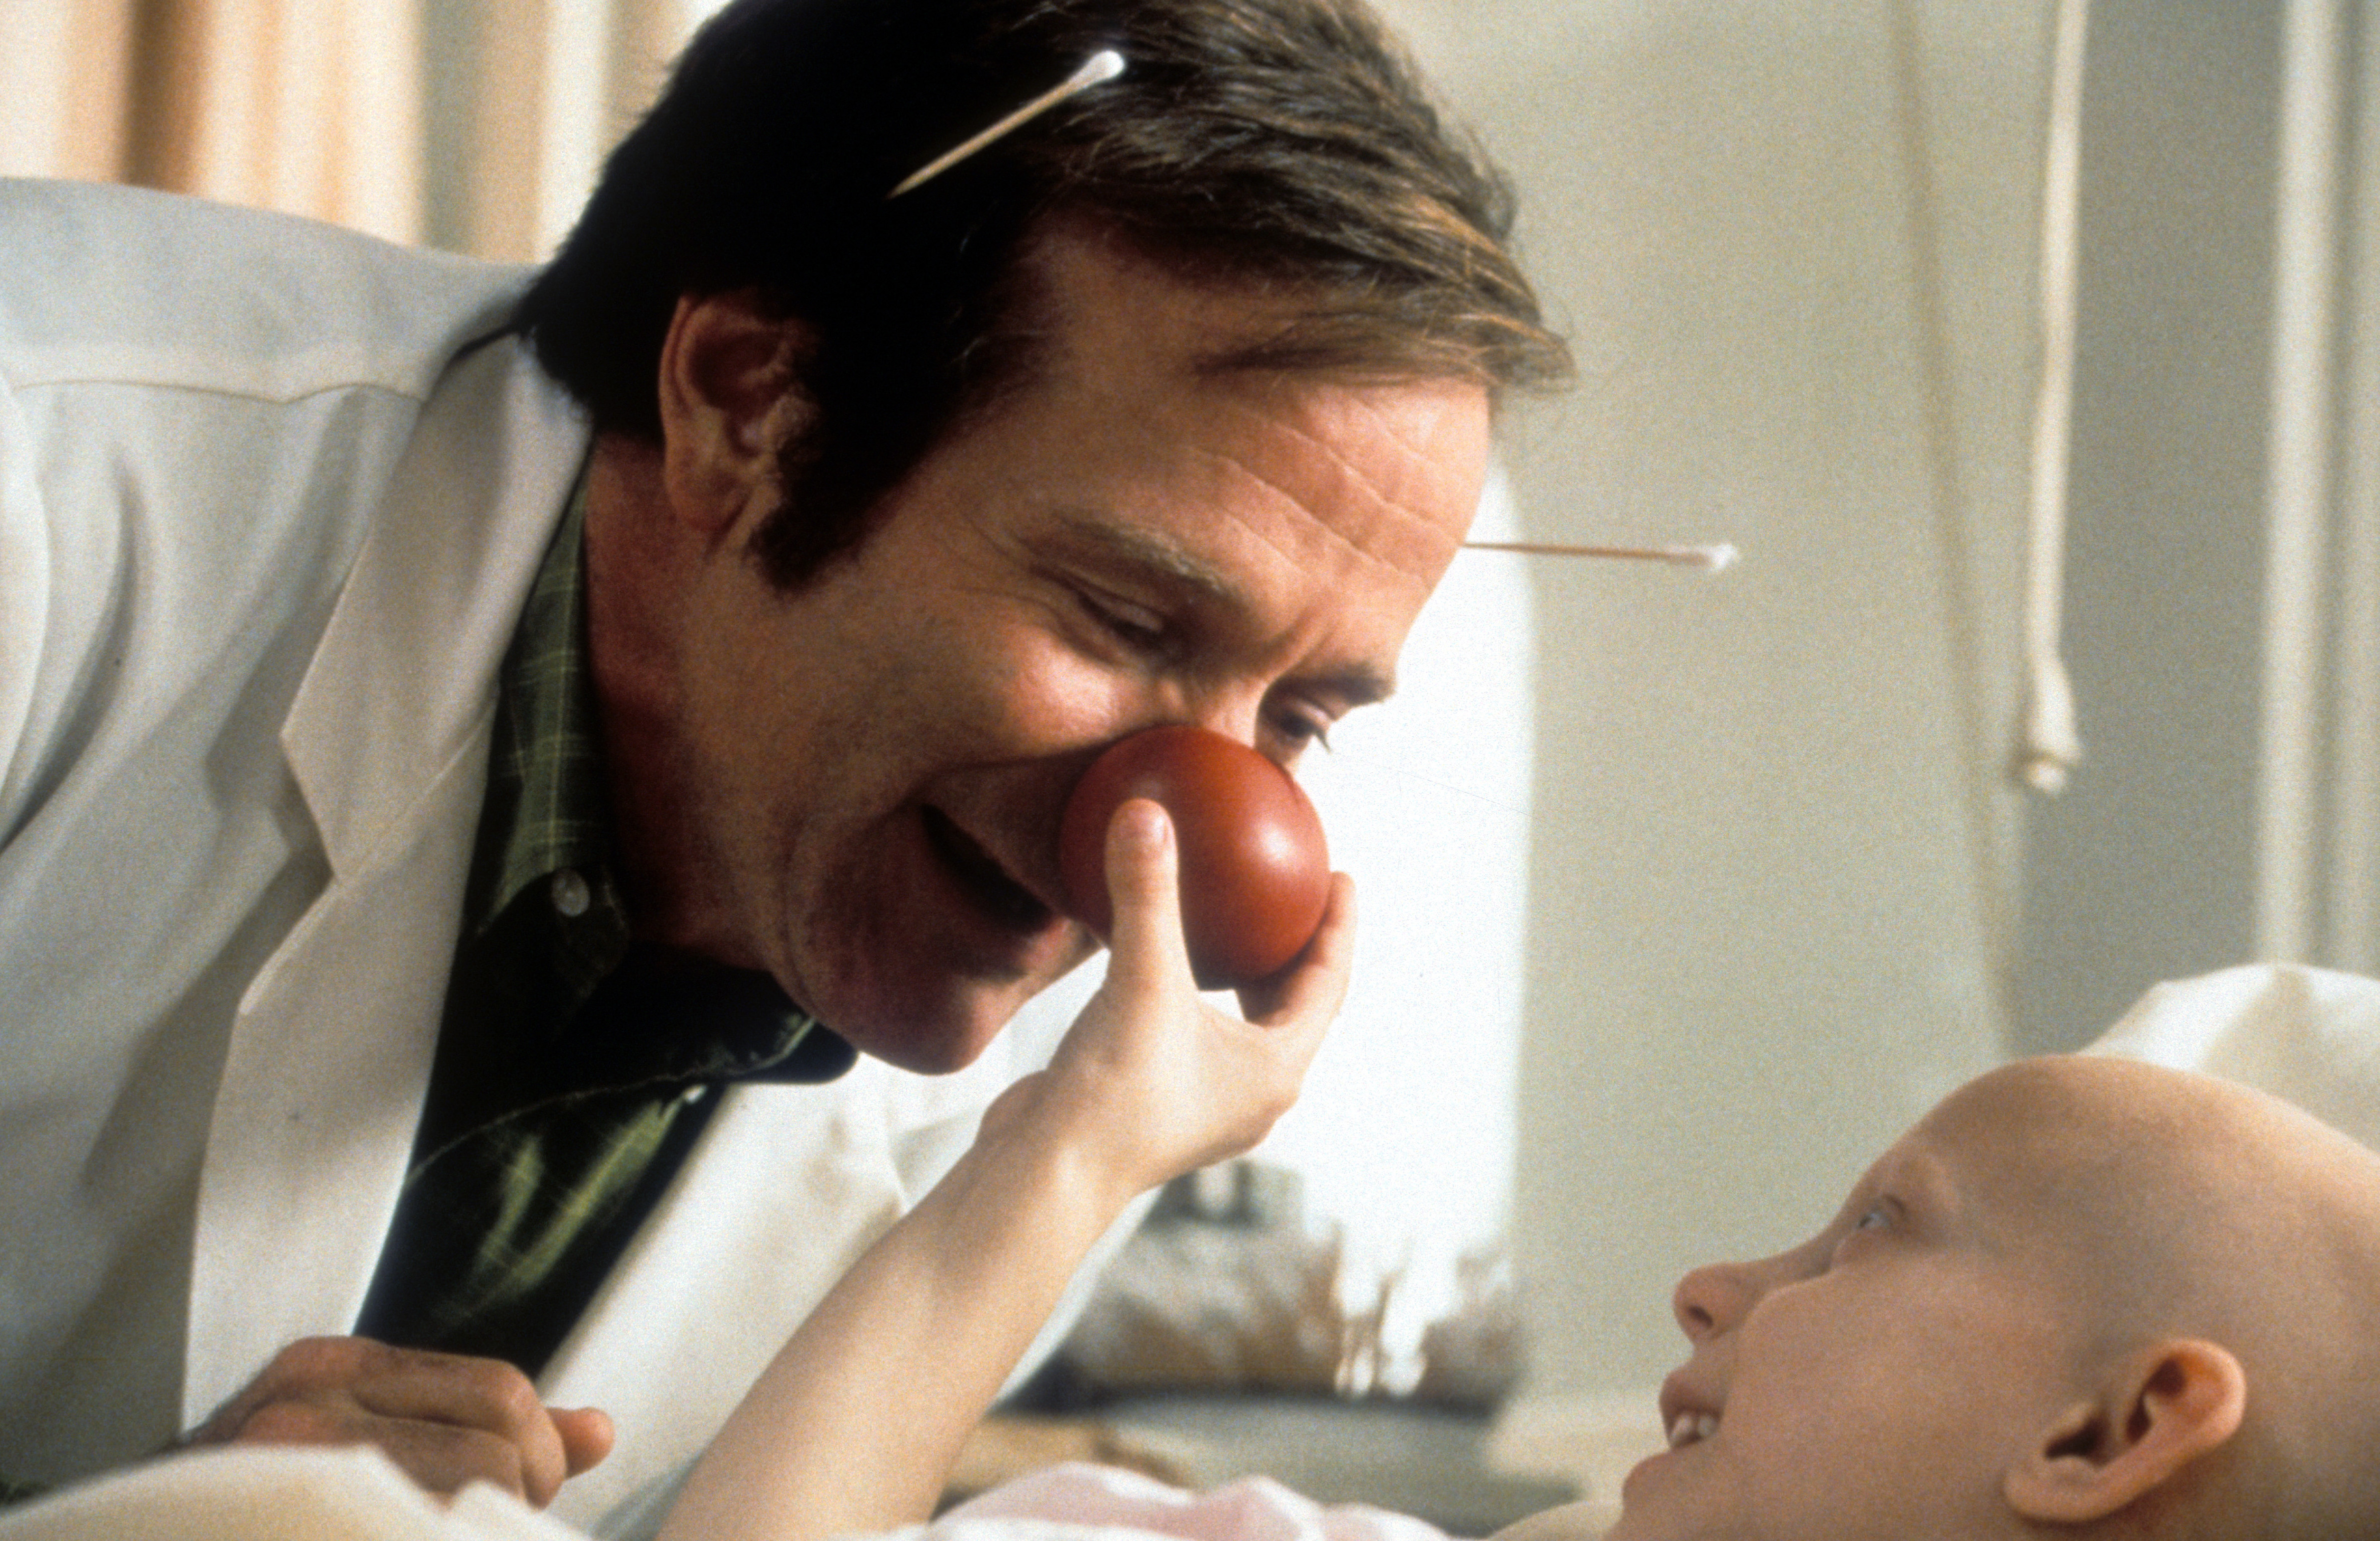 Robin Williams visits a sick child in a scene from the film "Patch Adams," in 1998 | Source: Getty Images